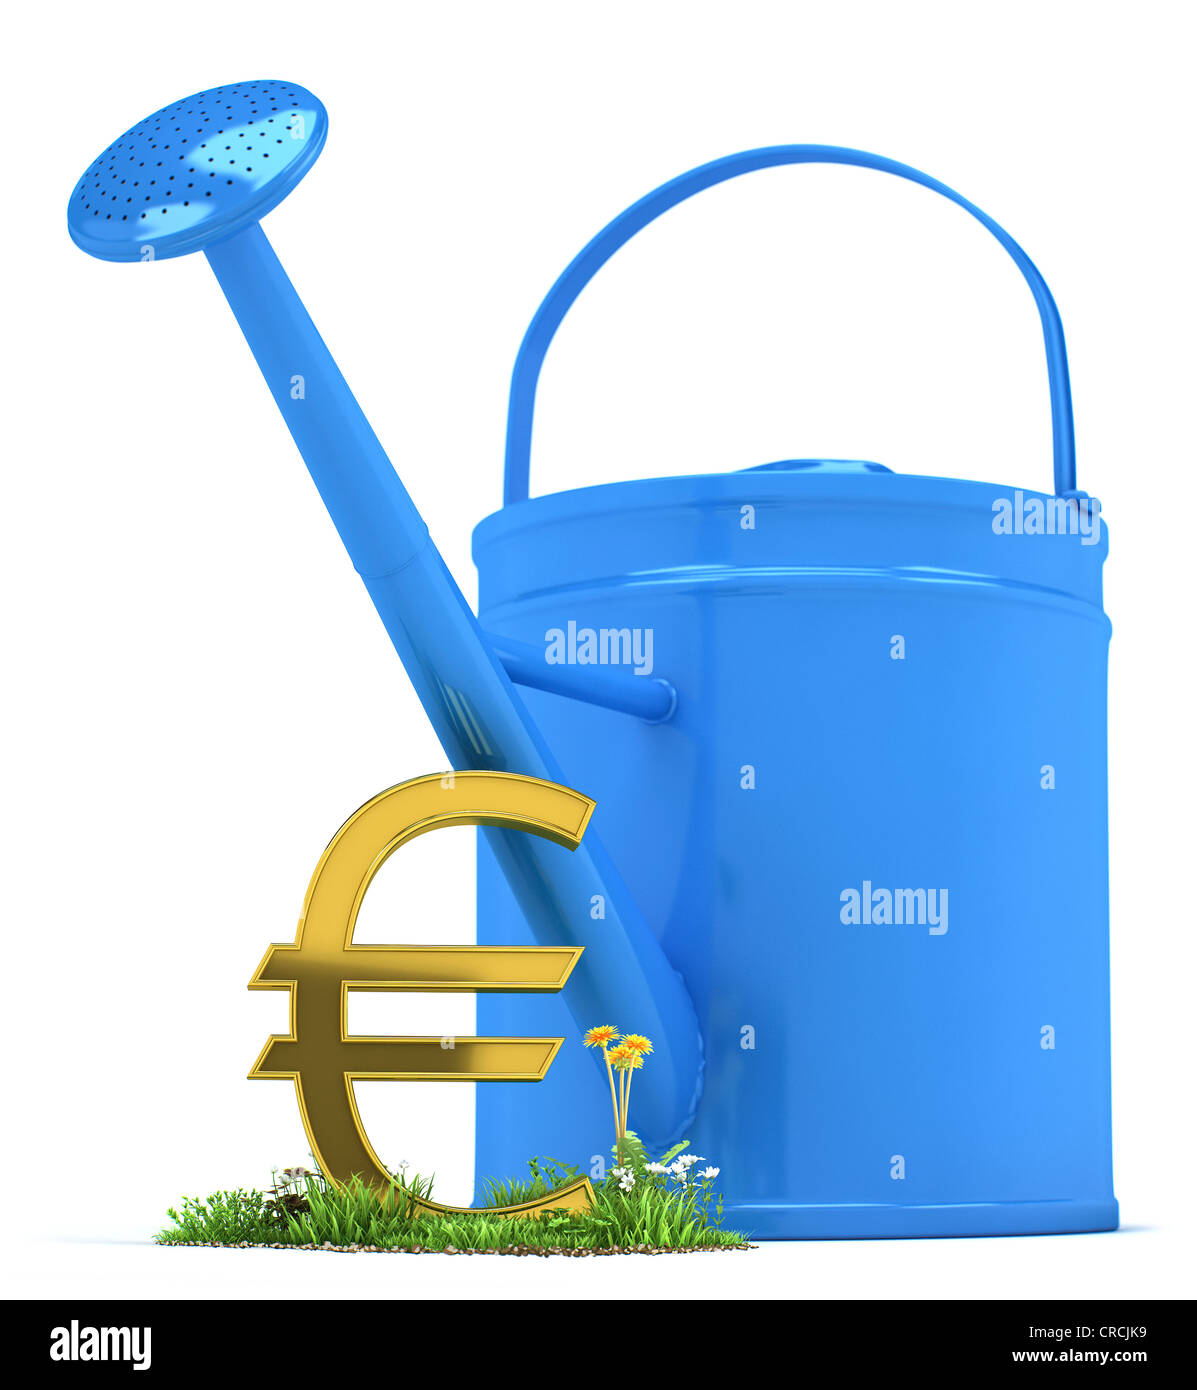 Watering can beside a euro symbol, symbolic image of a euro plant, illustration, 3D visualisation Stock Photo